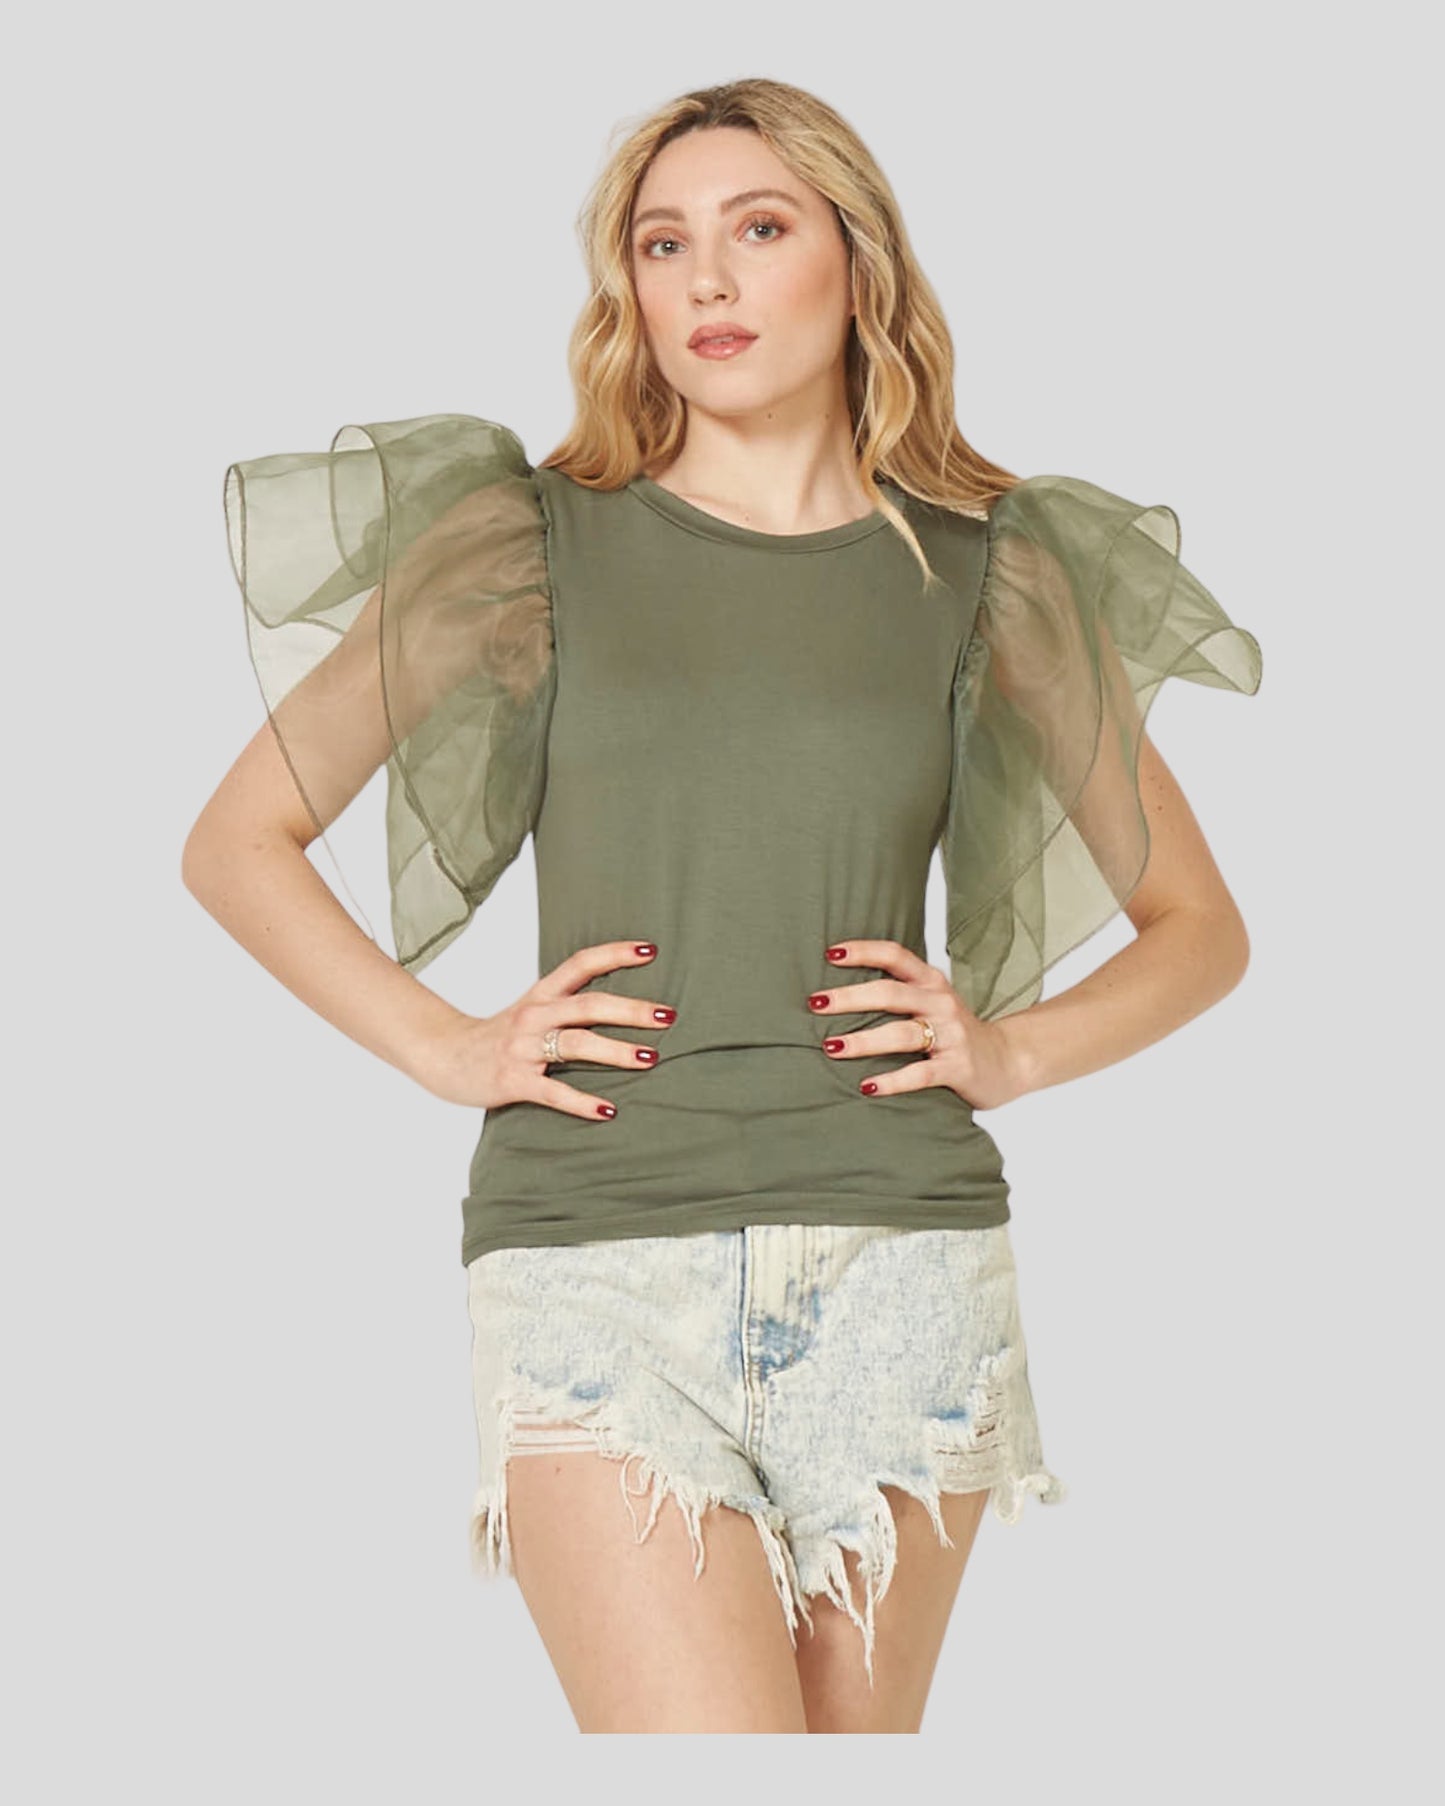 Short Sleeve T-Shirt with Tulle Ruffles, meticulously crafted to make a fashionable statement. The t-shirt boasts high-quality fabric with a slight stretch, ensuring both comfort and style. Short sleeves and delicate tulle ruffles add a touch of elegance, making it the perfect choice for the spring and summer seasons